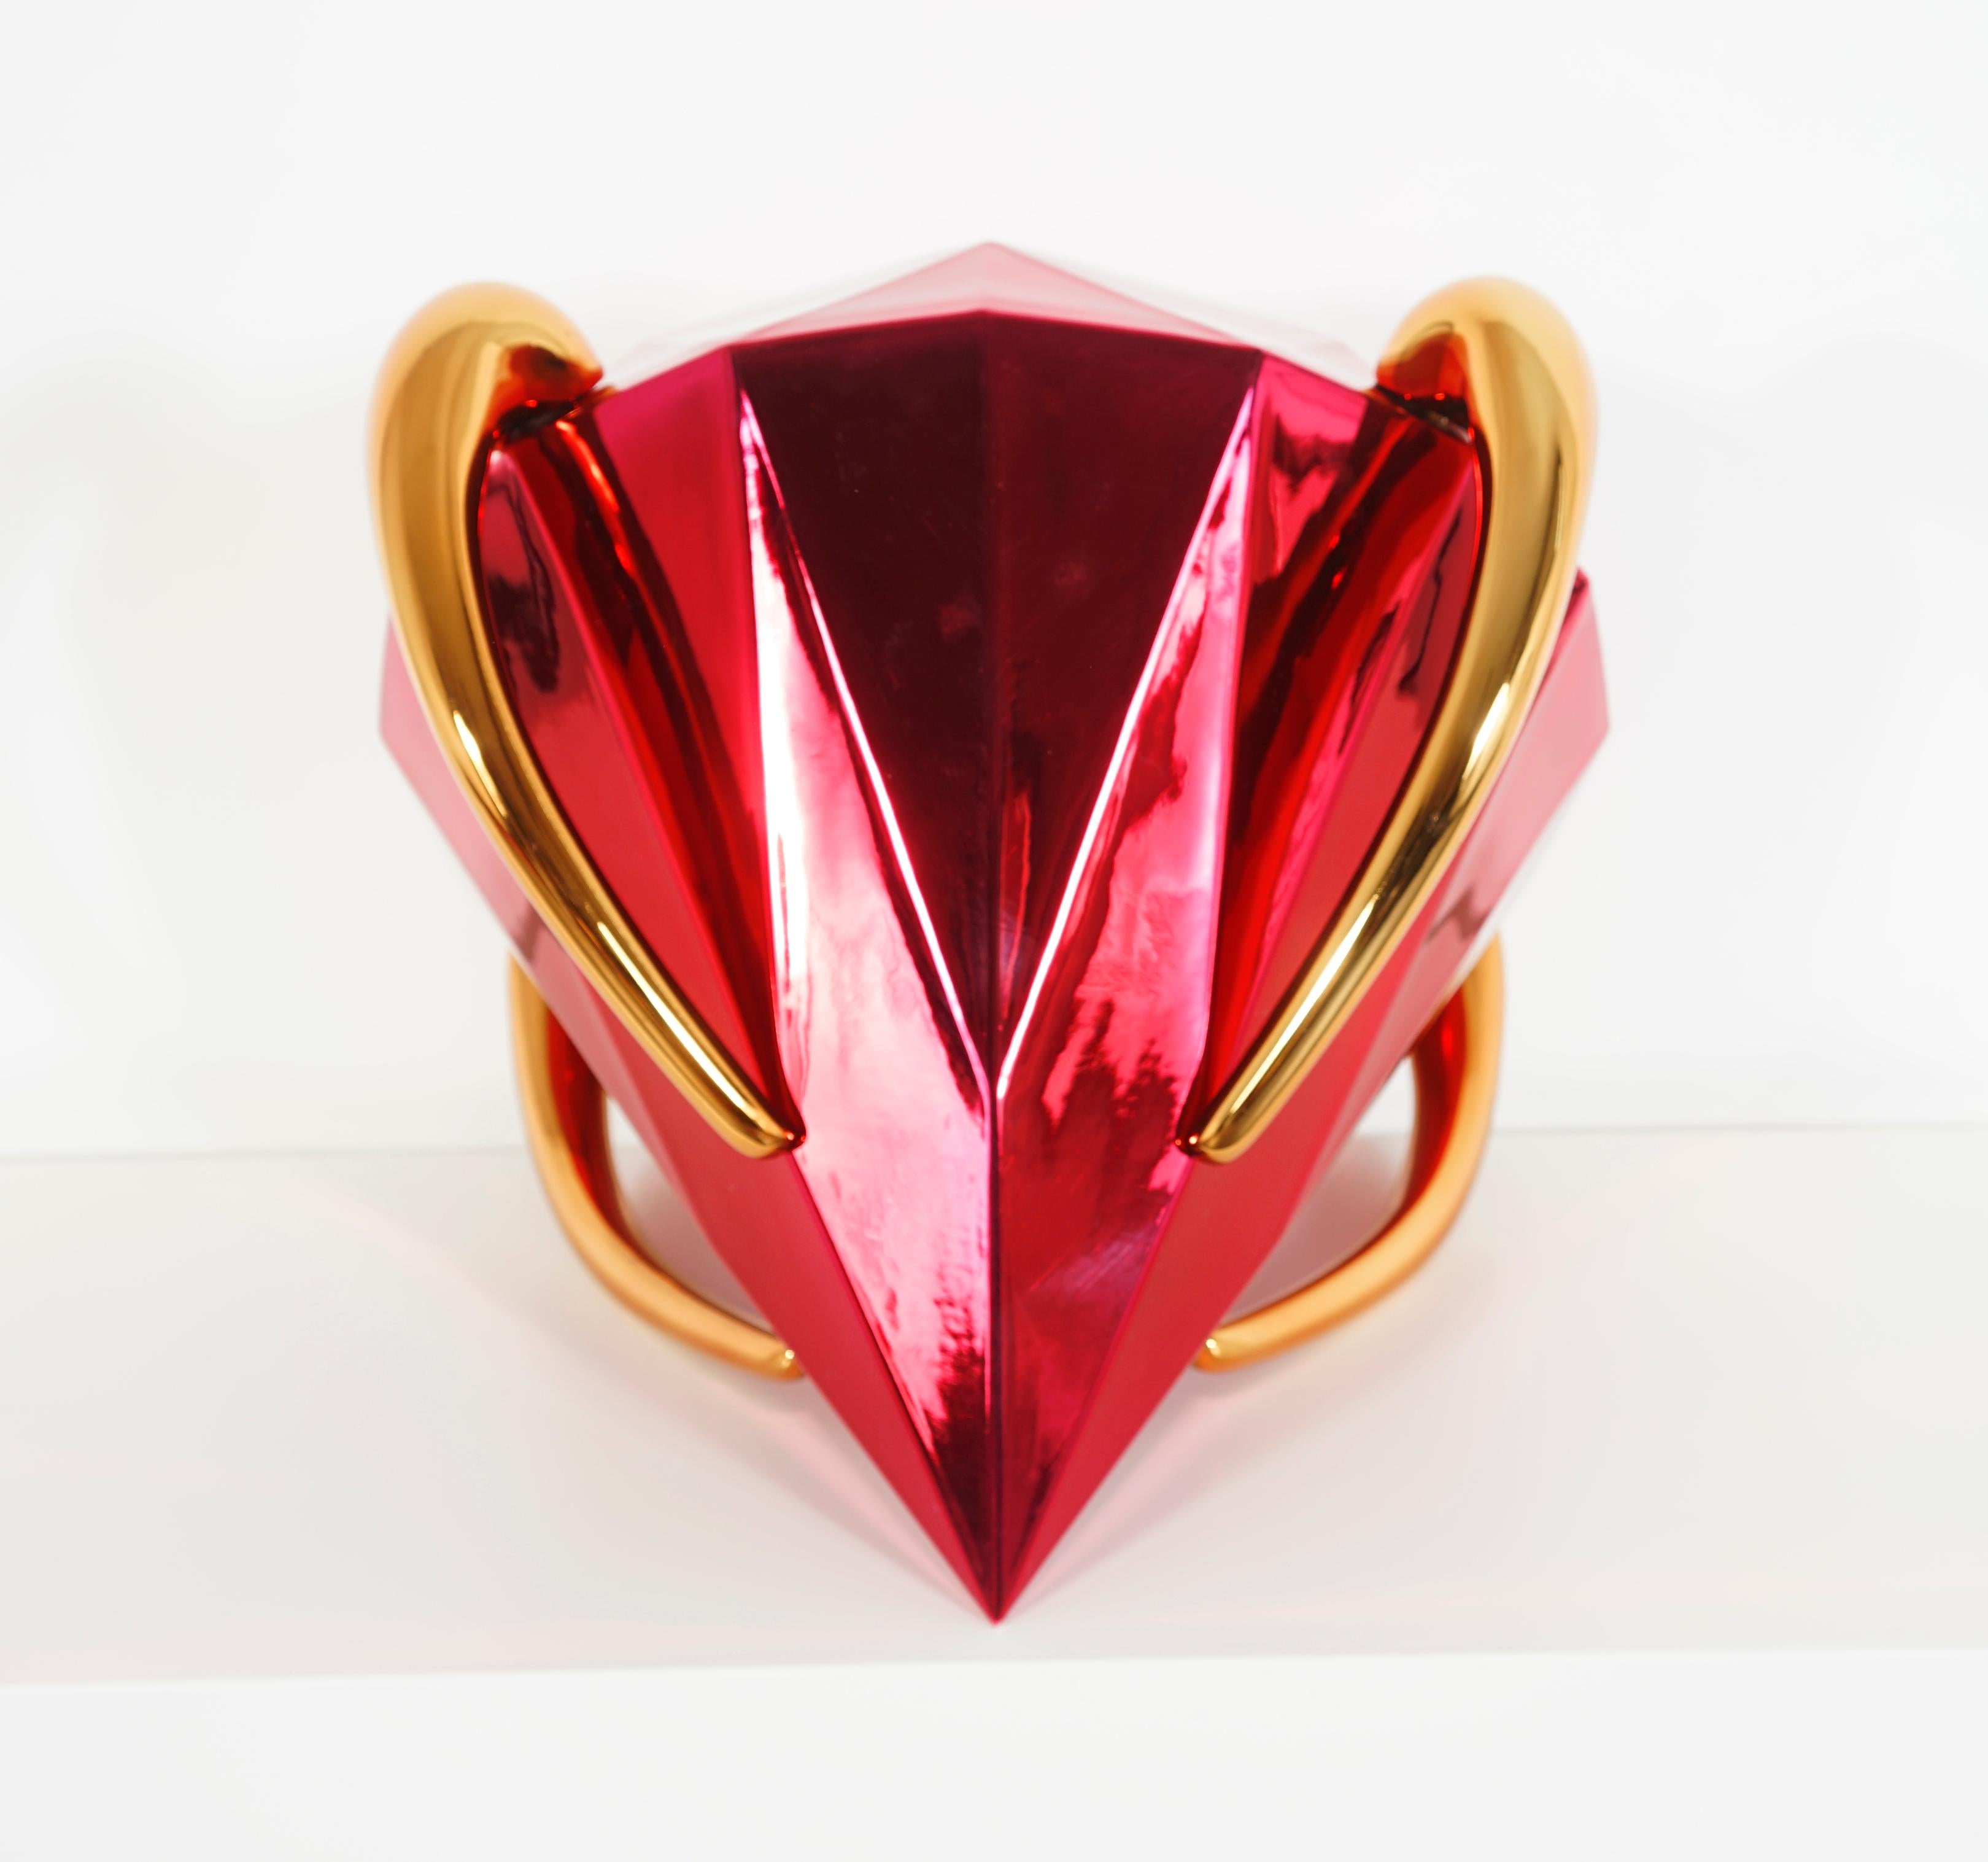 Diamond (Red) - Jeff Koons, Contemporary, 21st Century, Sculpture, Limited Edition

Limoges porcelain with chromatic metalized coating
Edition of 599
height: 32,4 cm (12.7 in) diameter: 39,2 cm (15.4 in.)
Signed and numbered
In mint condition, as